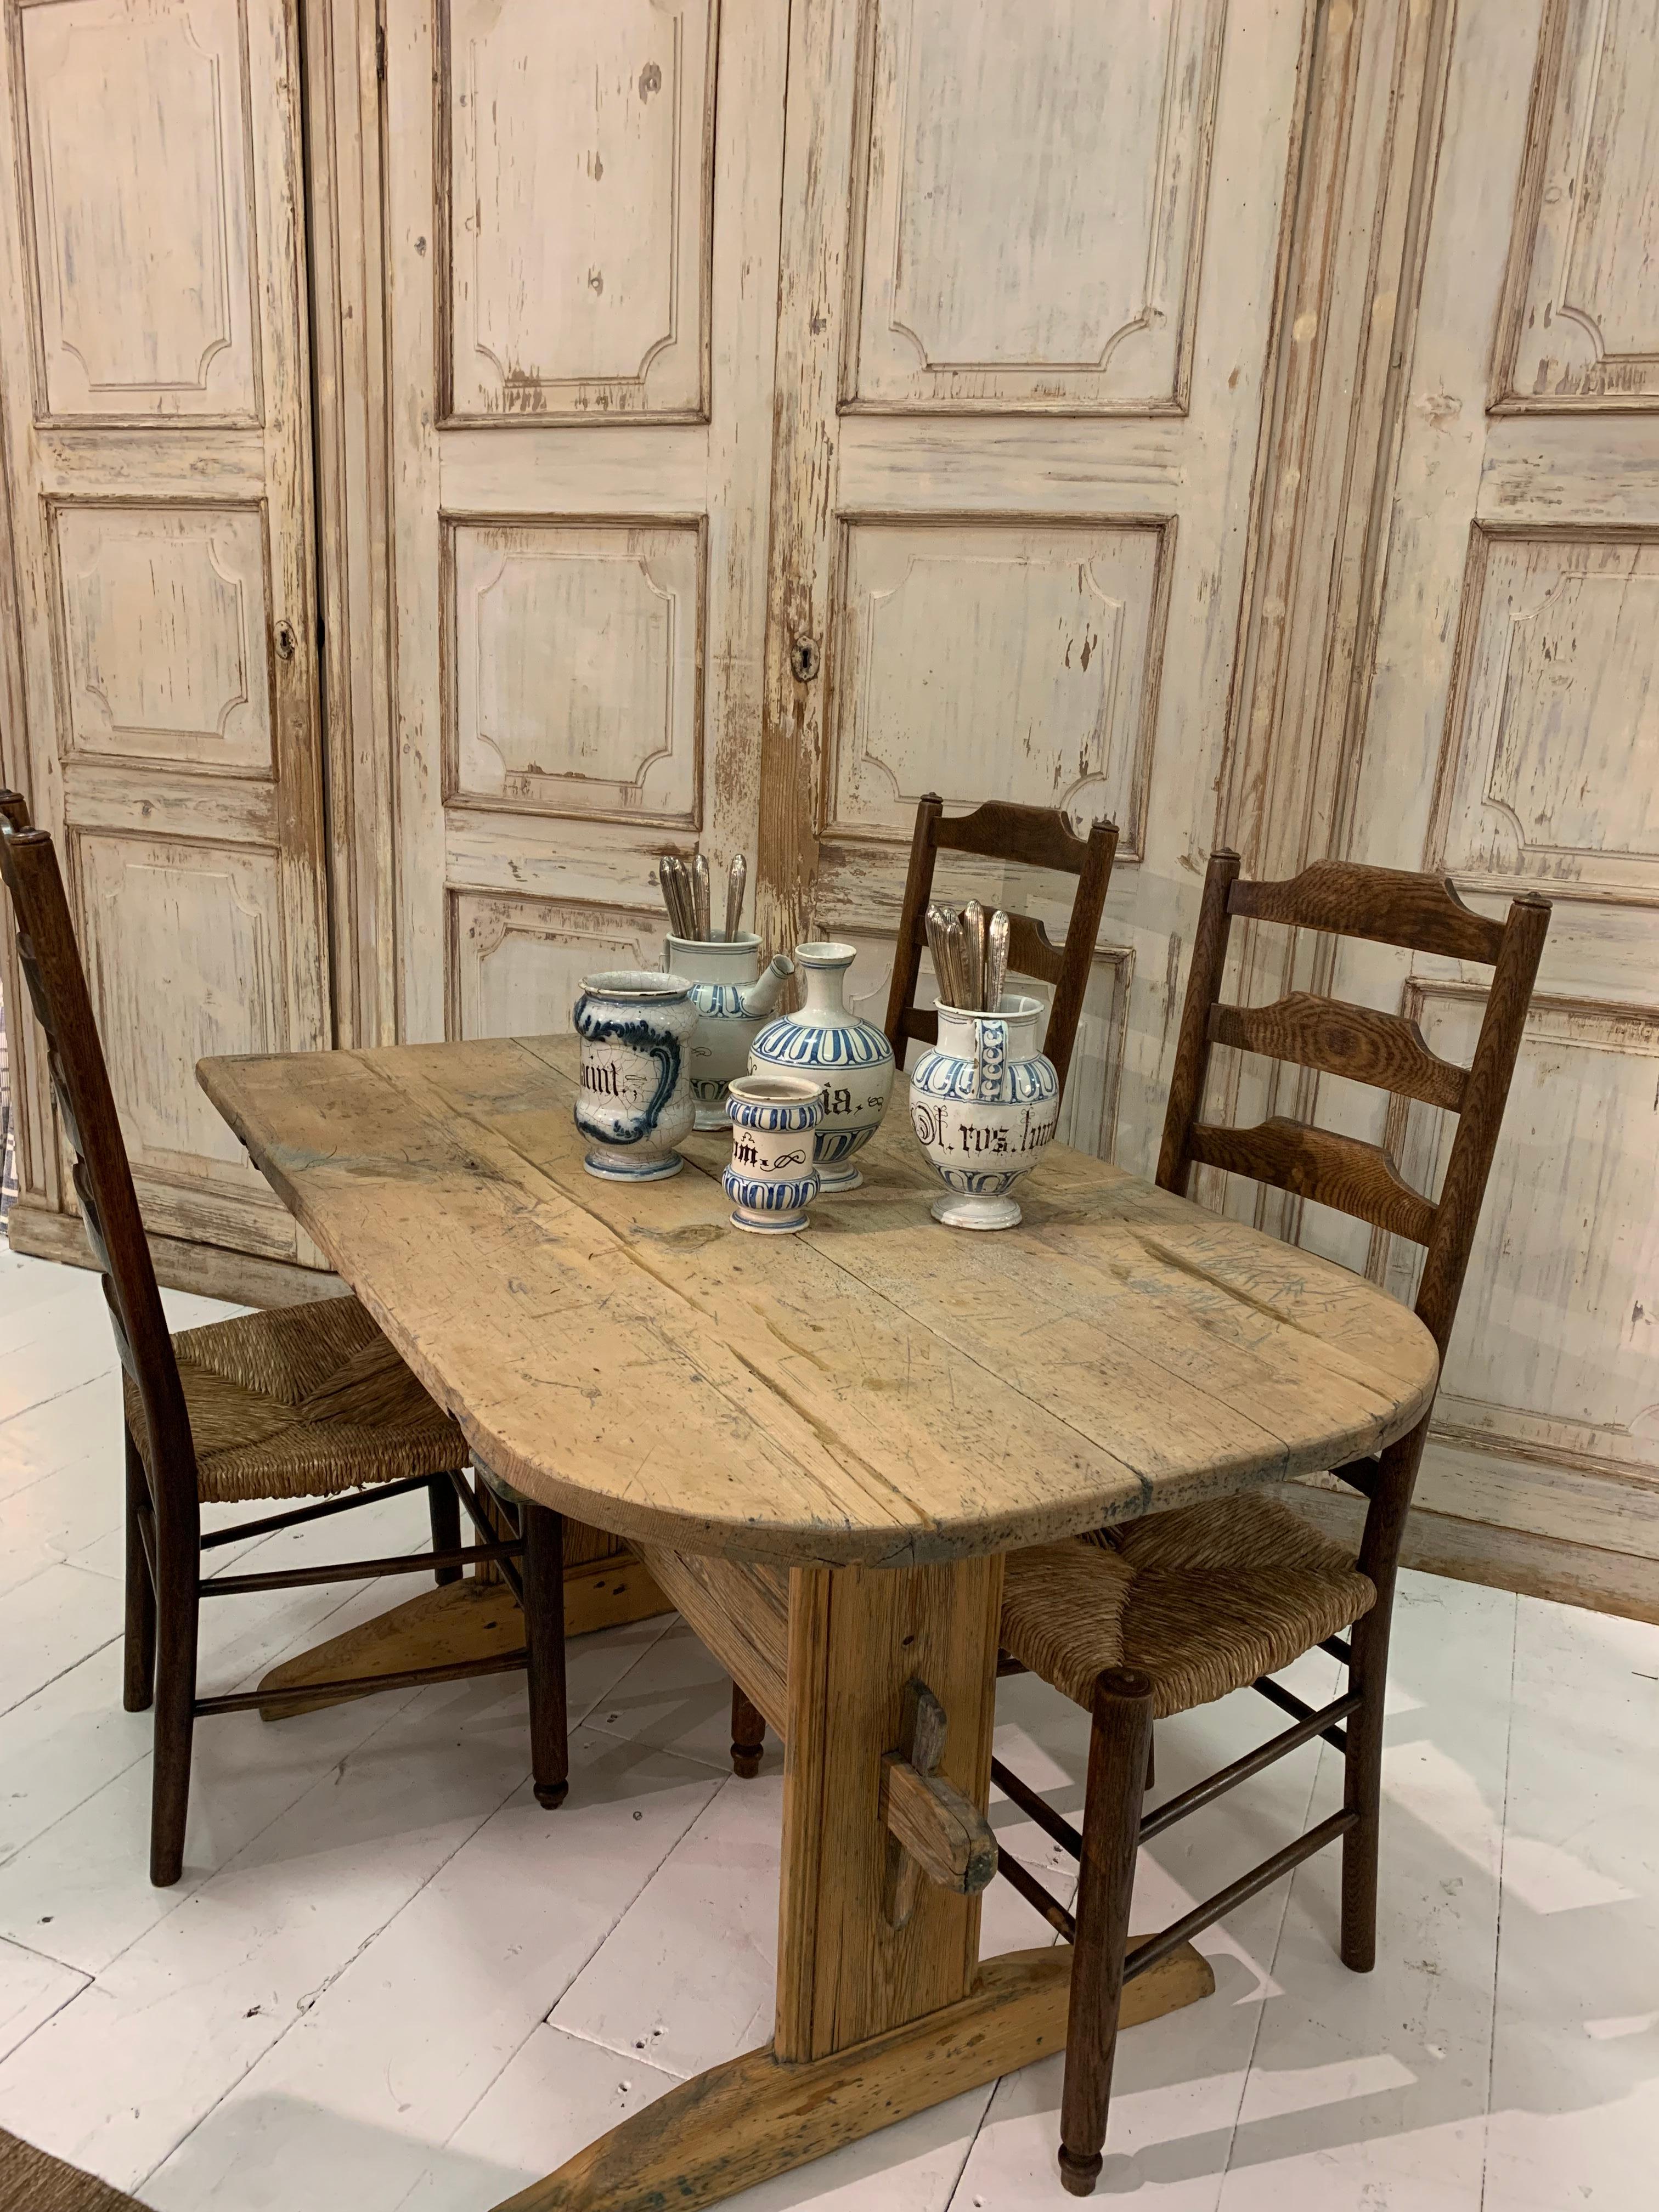 Swedish Country Pine Refectory Table with One Curved End, circa 18th Century For Sale 2